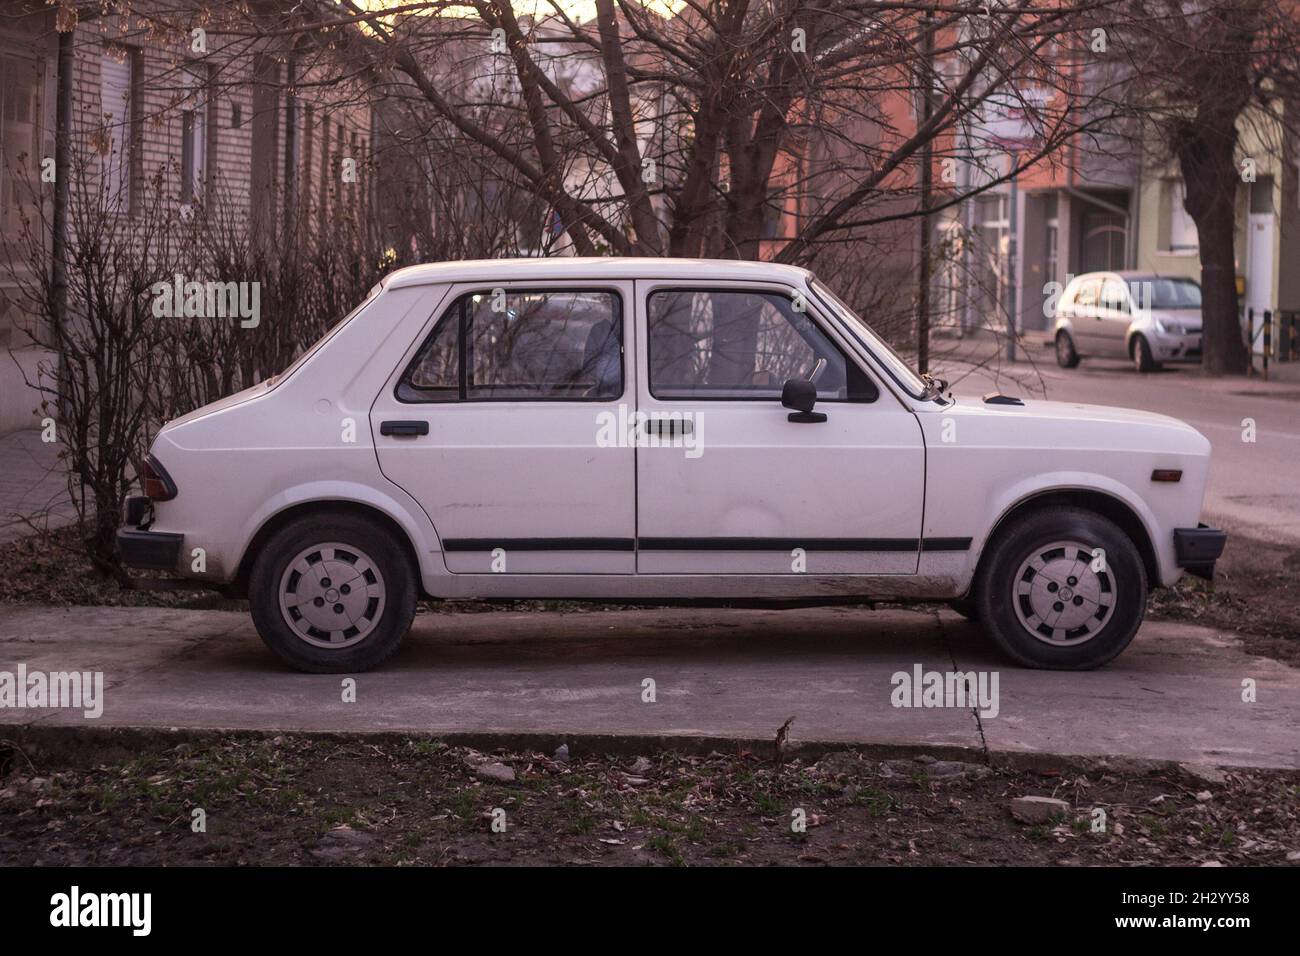 Picture of a Skala car, white colors, branded as Zastava 55 and Yugo 55, parked in a car park of Vrsac Serbia. Skala is a generic name for a family of Stock Photo